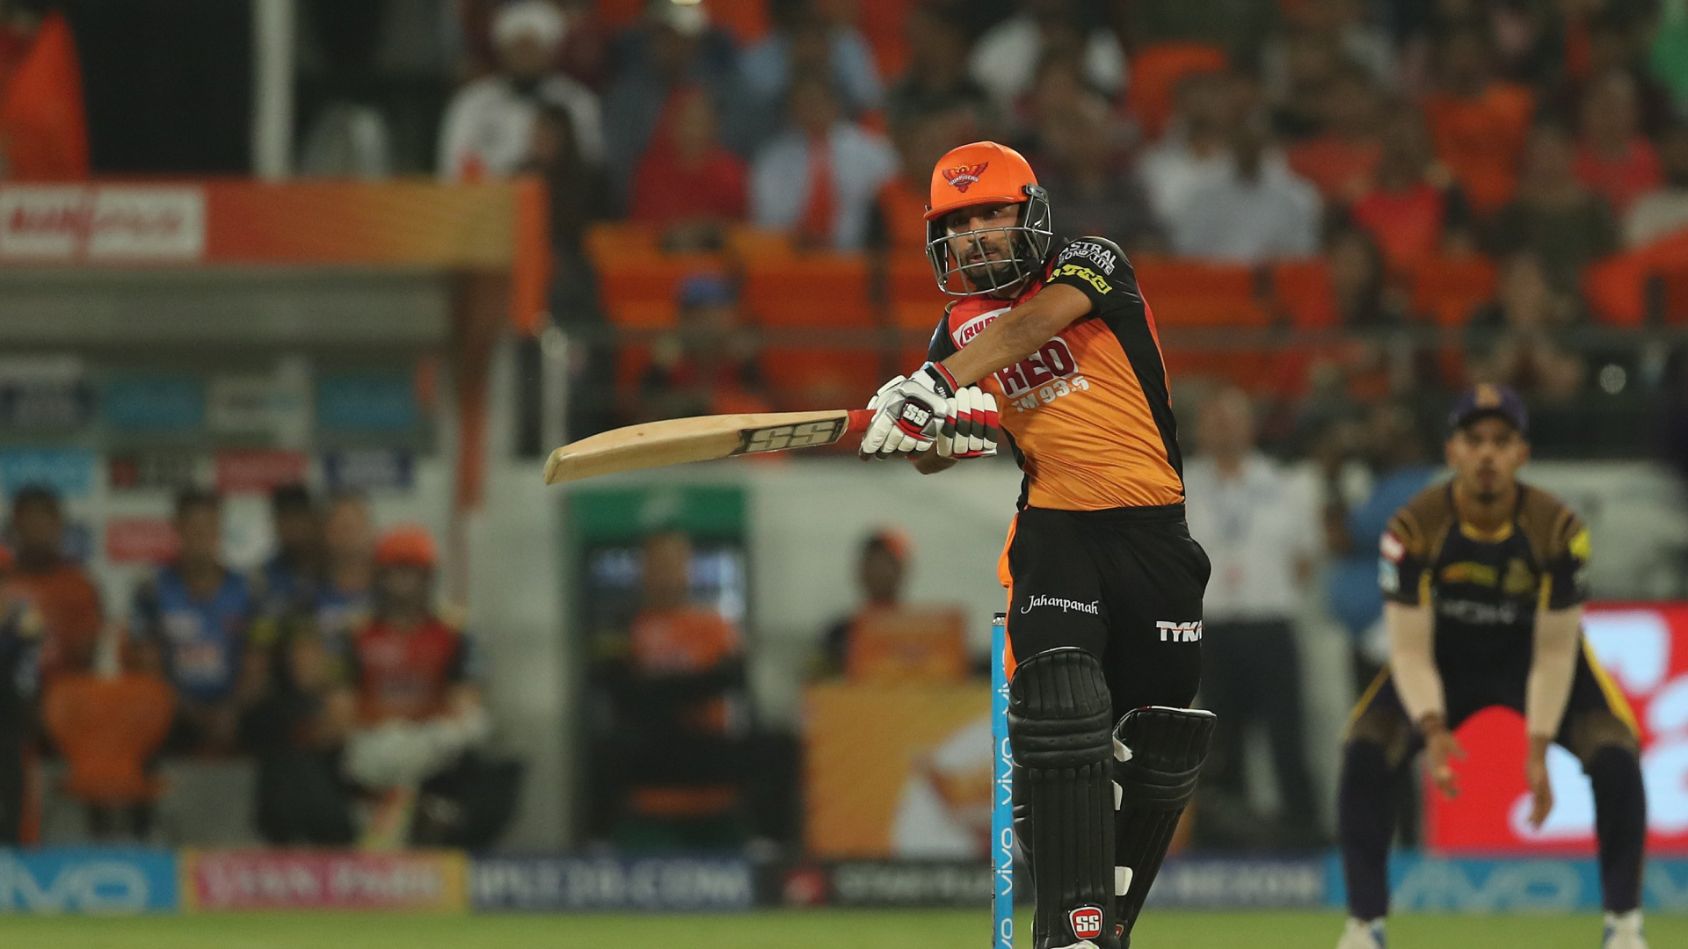 SRH’s Shreevats Goswami surprised at only Wriddhiman Saha testing positive for Covid-19 